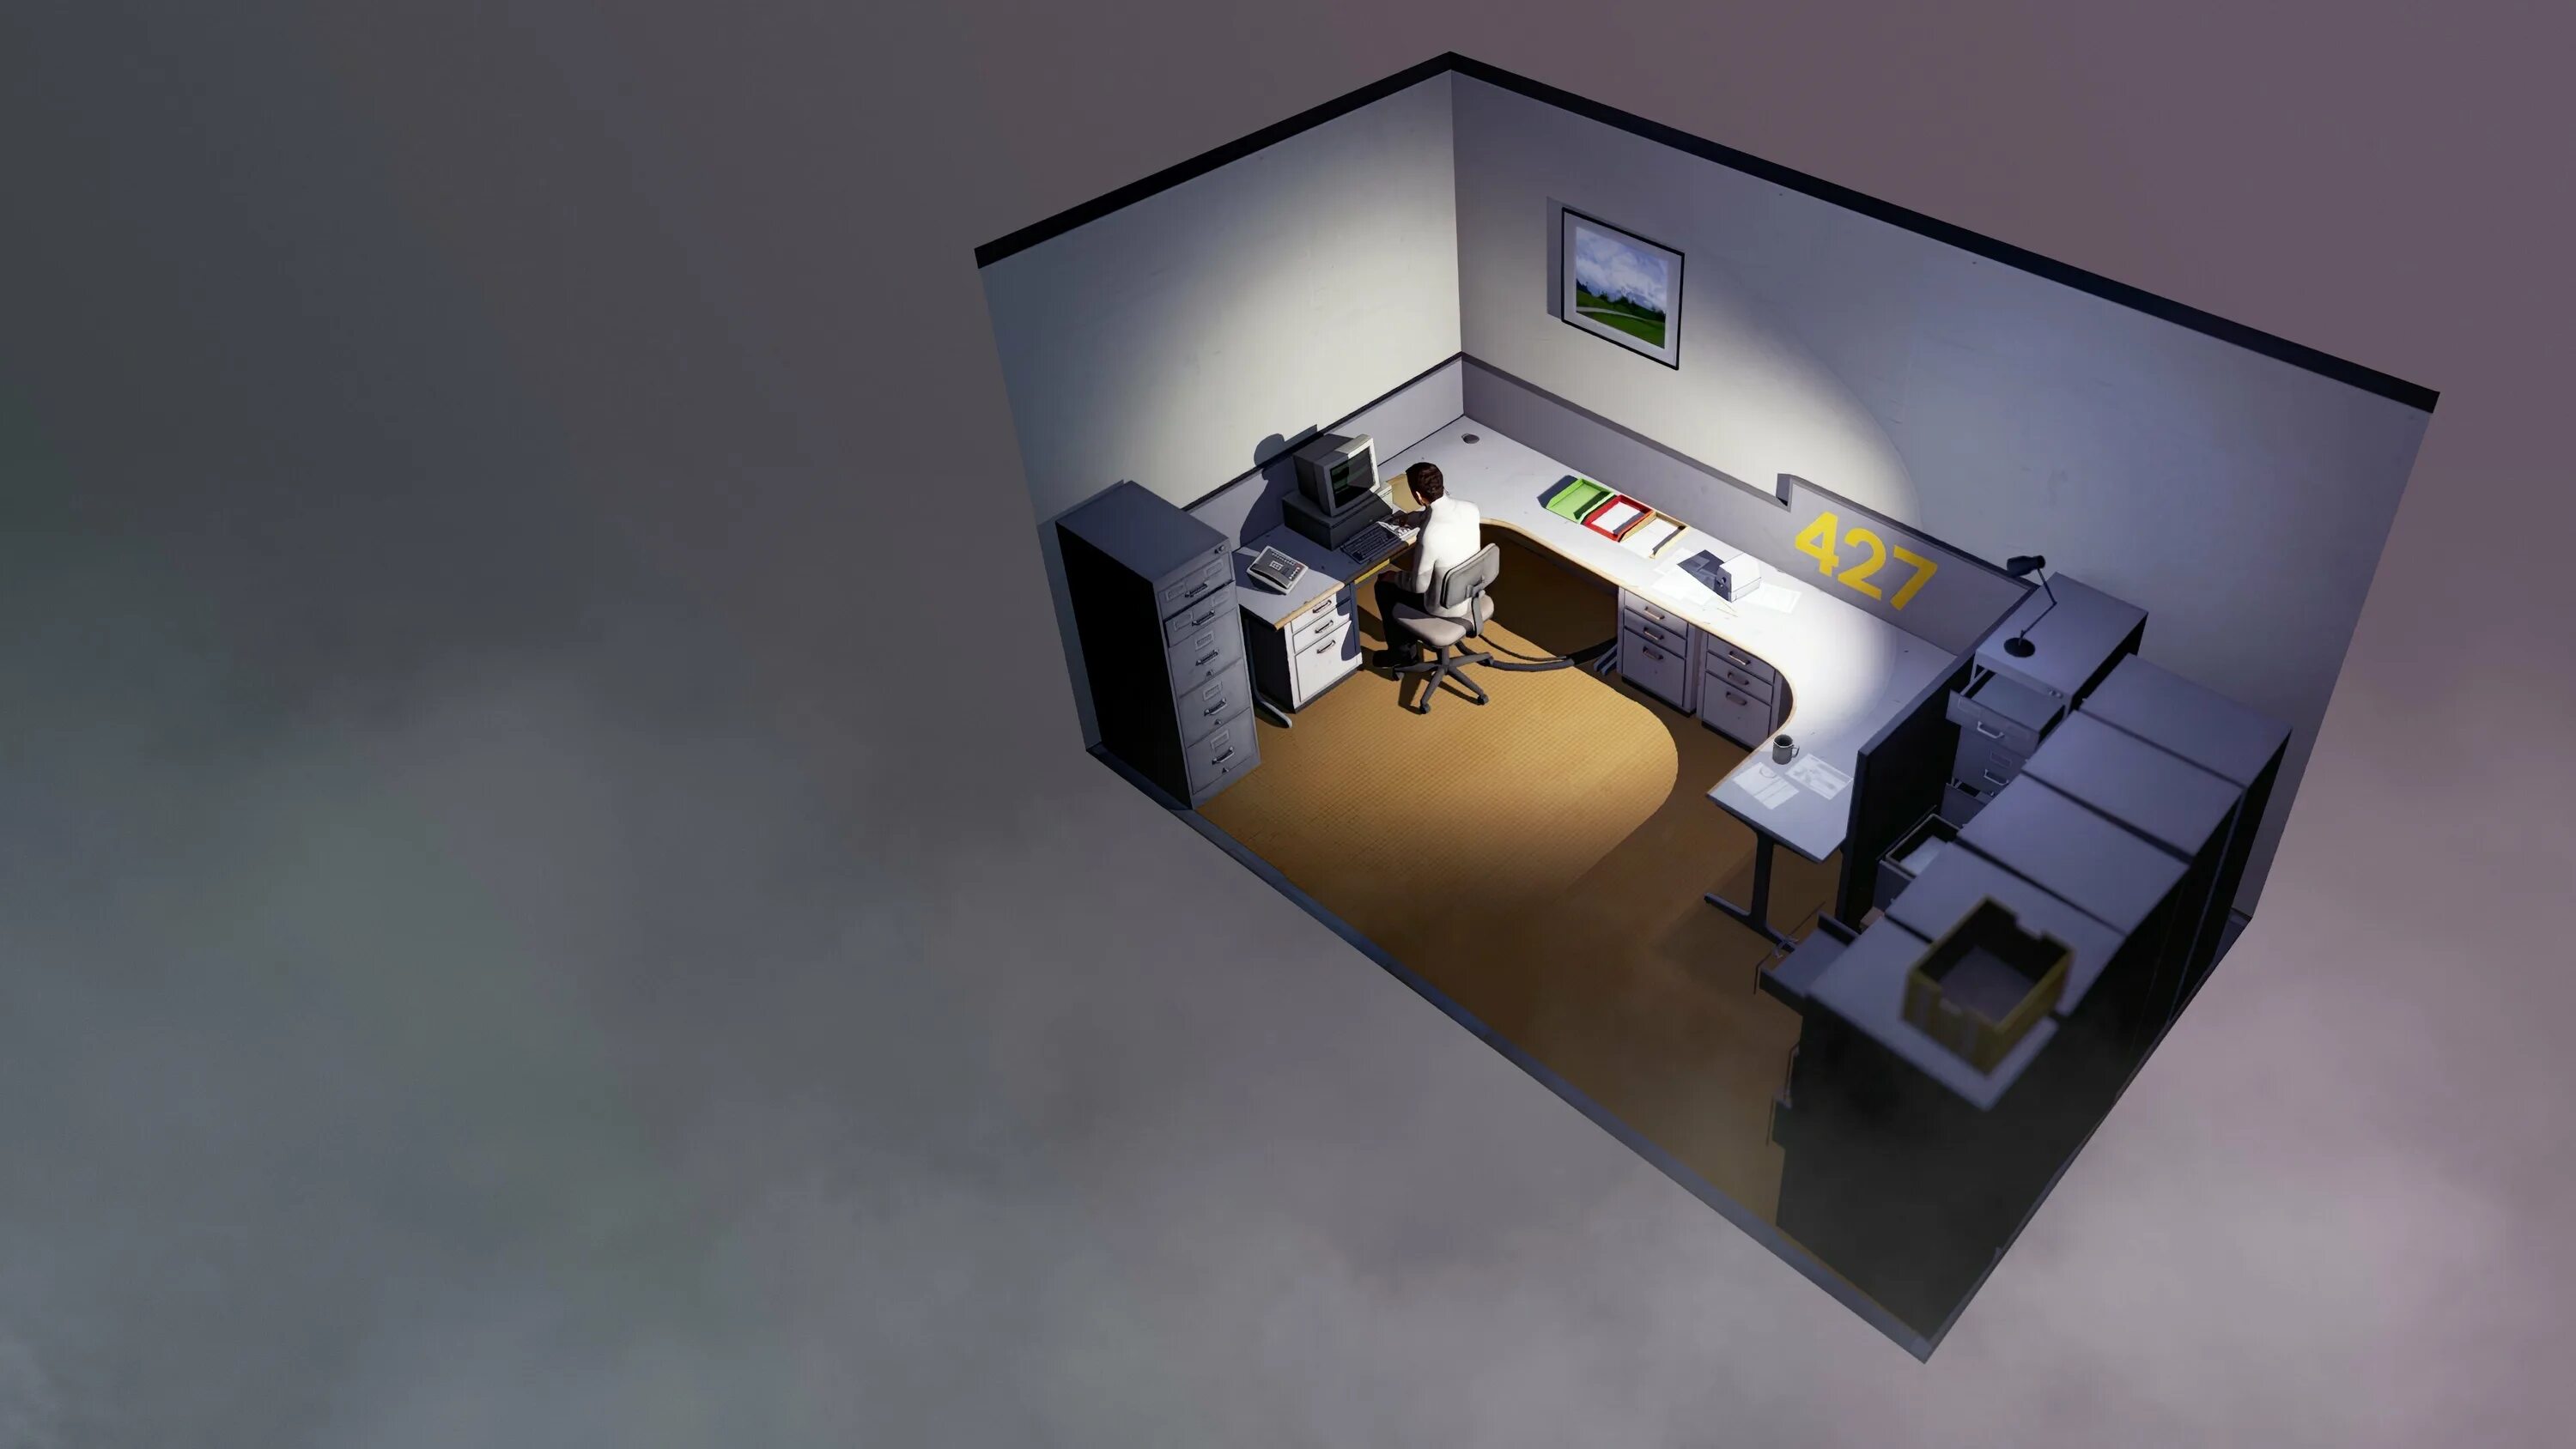 Ultra deluxe. The Stanley Parable: Ultra Deluxe. Игра the Stanley Parable. Стэнли парабл пс4. Стэнли парабл ультра Делюкс Стенли.